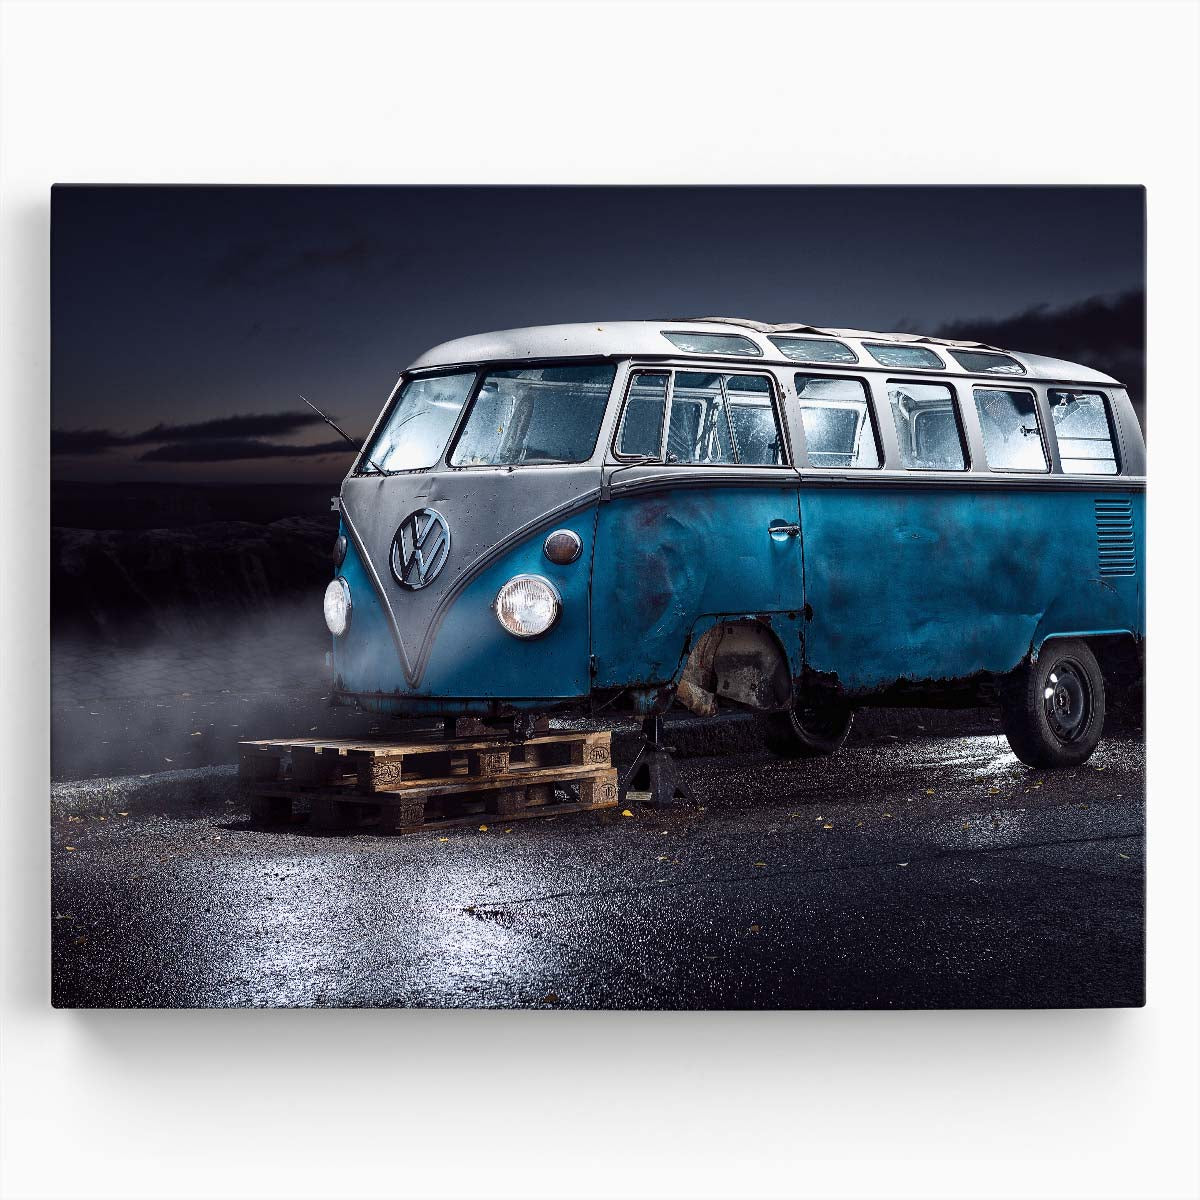 Vintage Volkswagen Bus Abandoned Classic in Kuopio Wall Art by Luxuriance Designs. Made in USA.